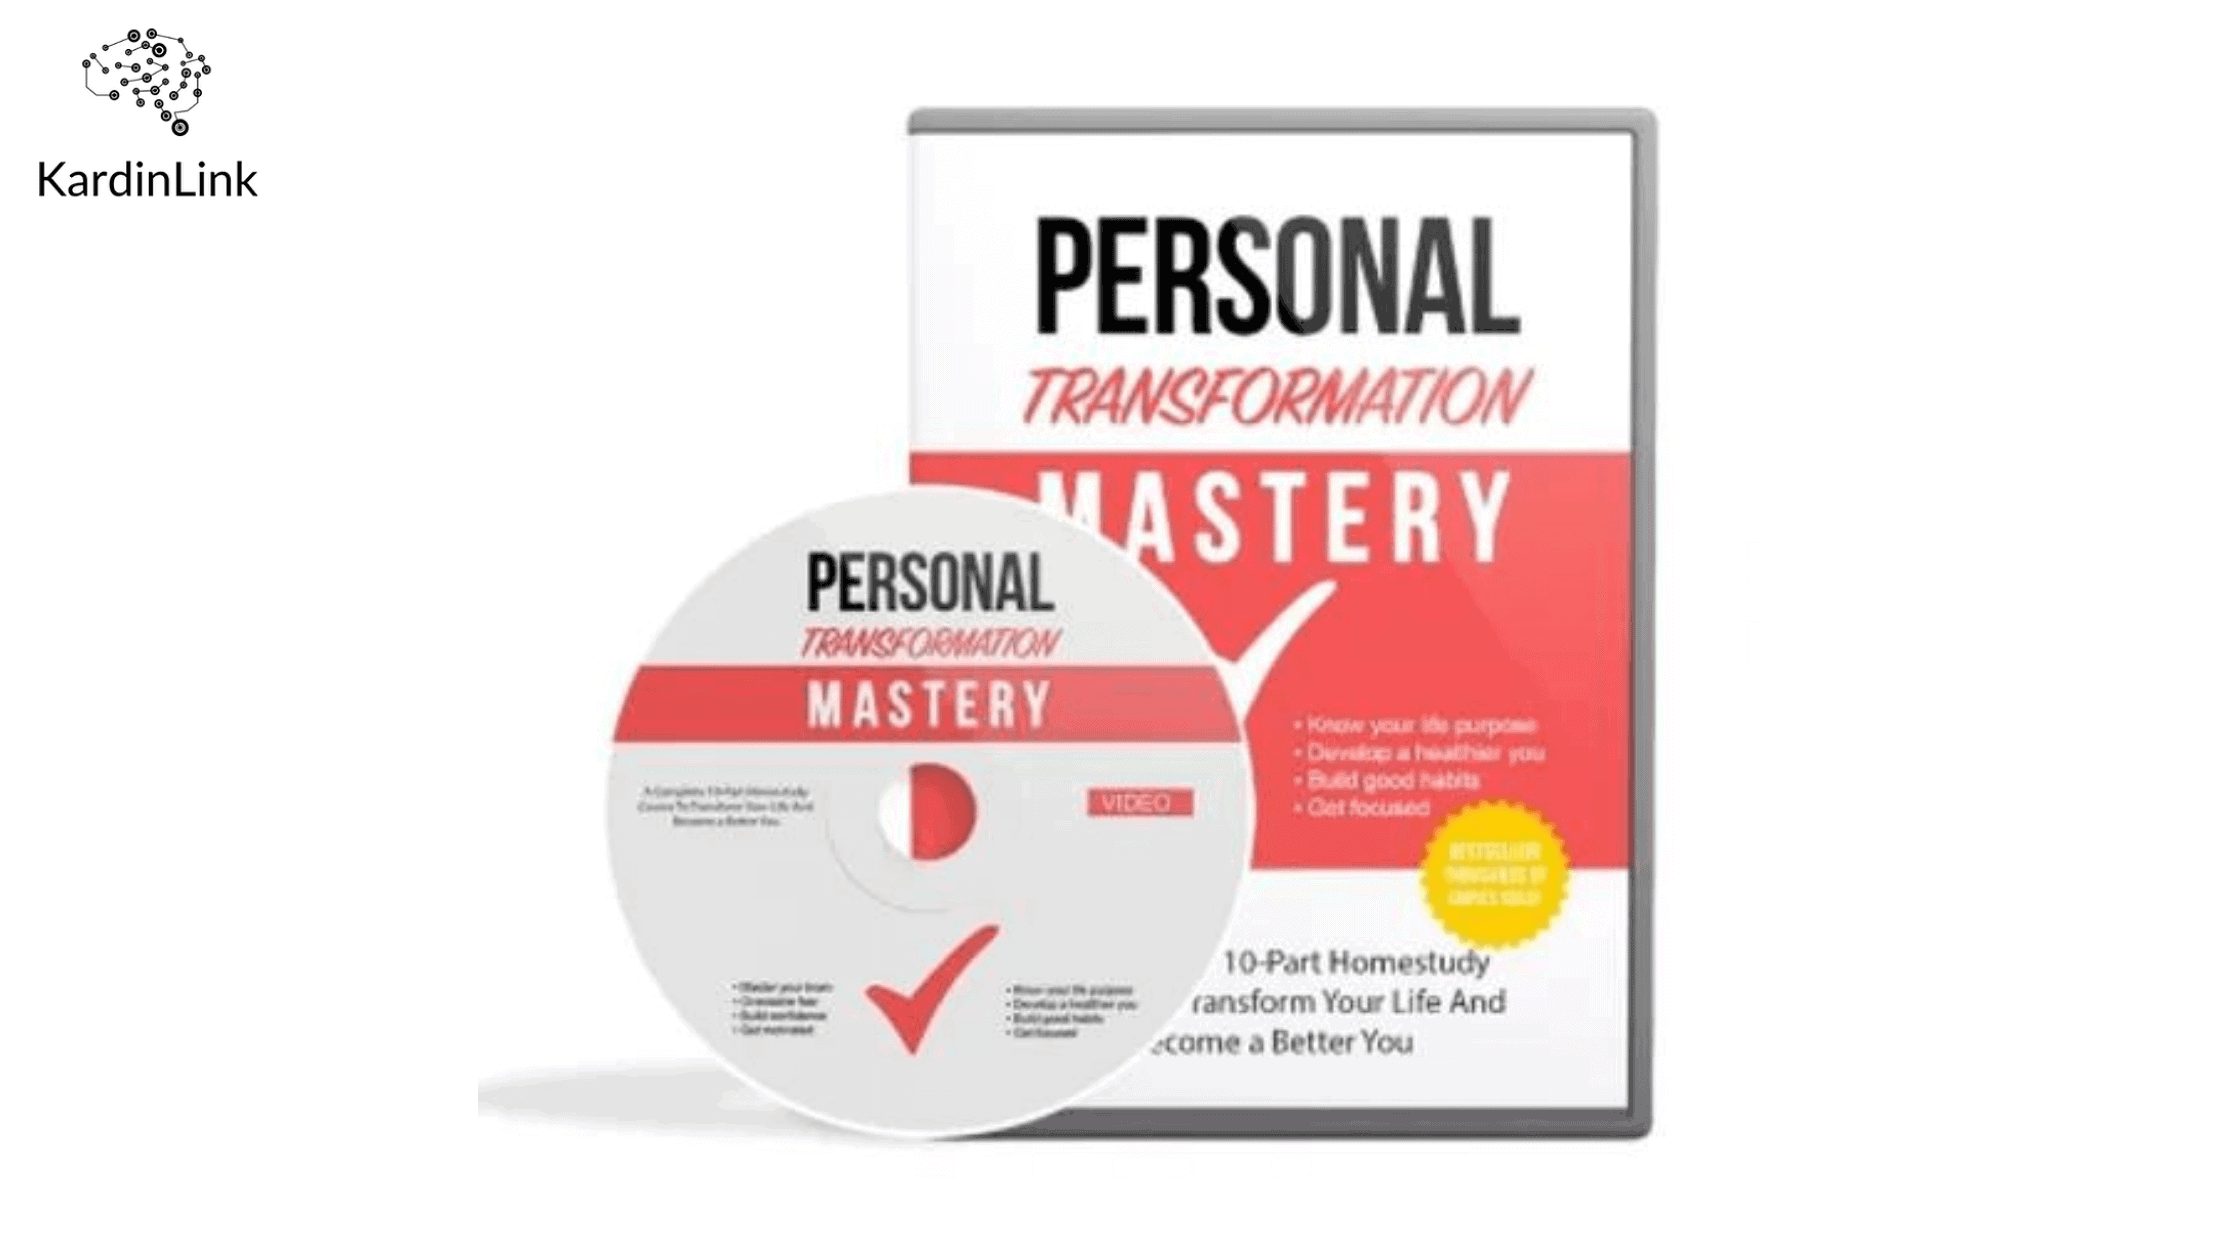 Personal Transformation Mastery Gold